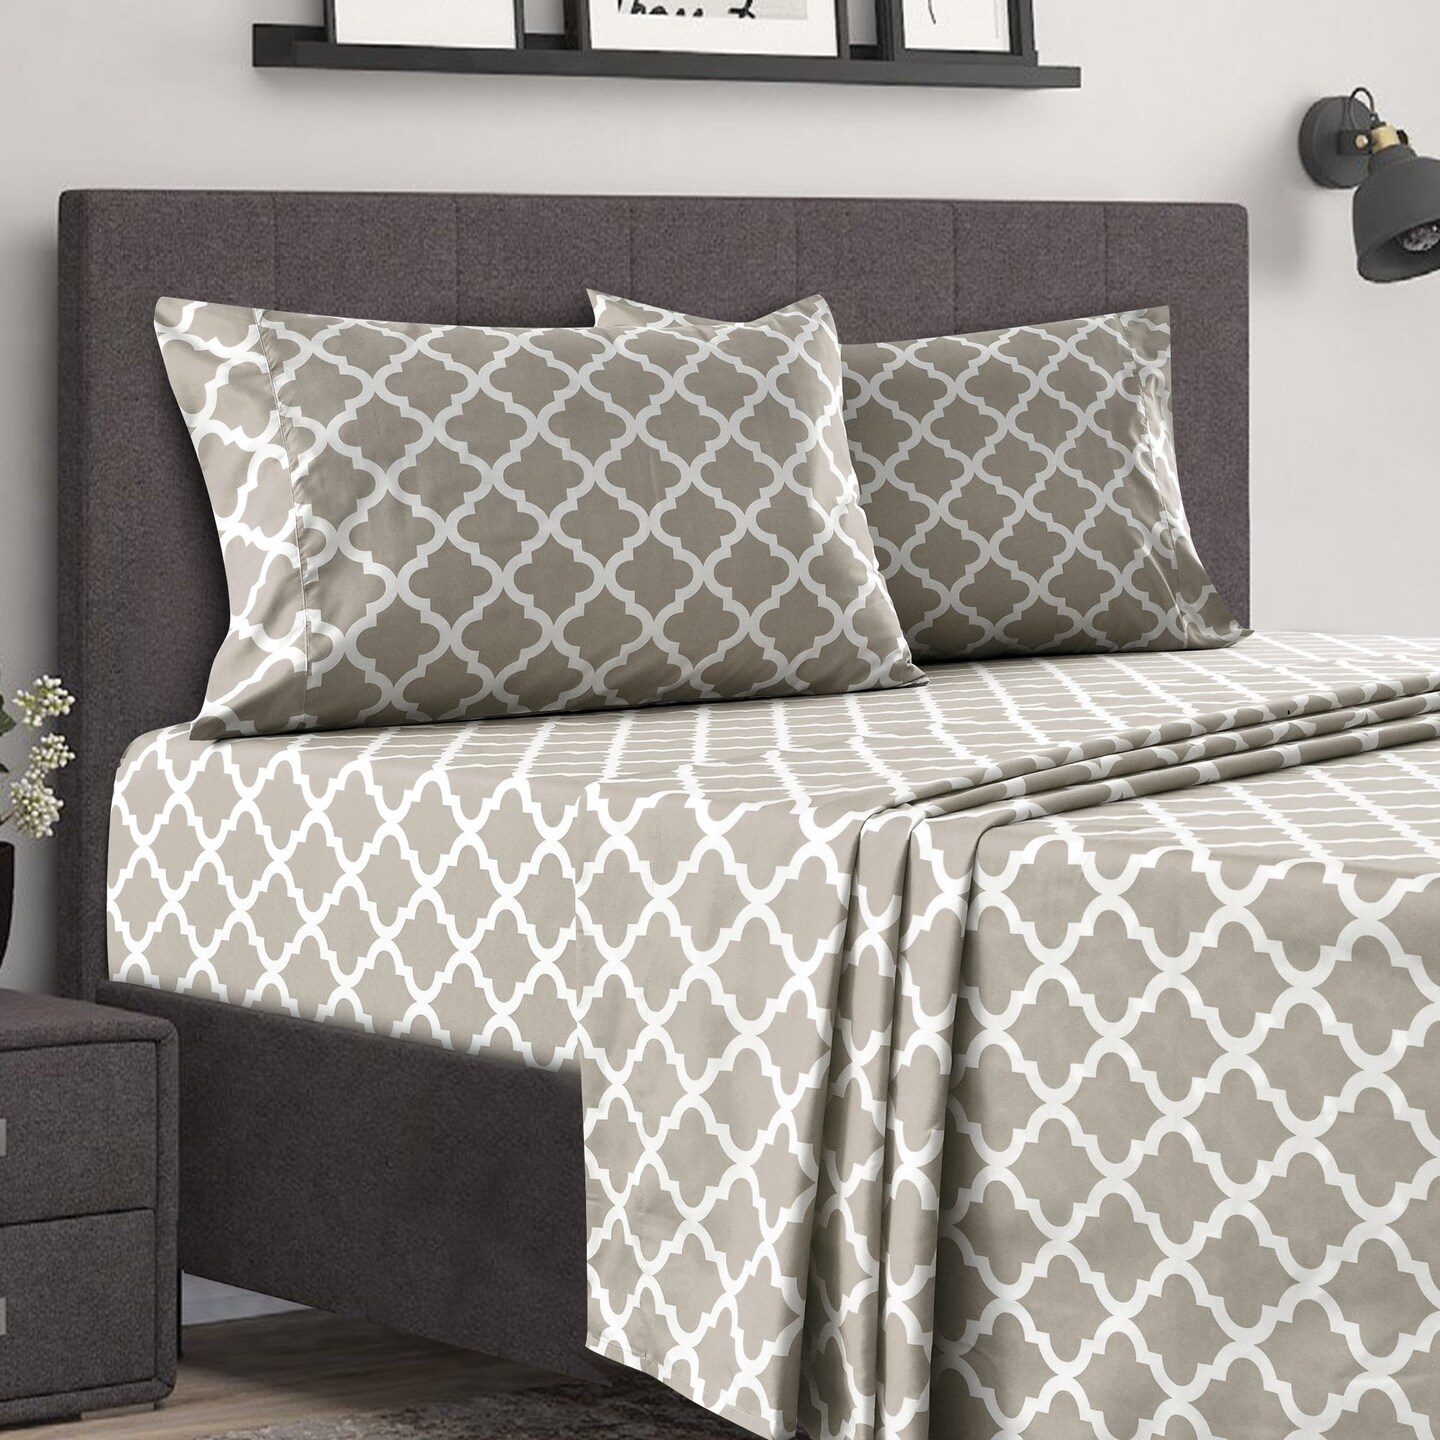 Lux Decor Collection 1800 Series Quatrefoil Pattern Bed Sheets Set - Wrinkle Fade Stain Resistant - Hypoallergenic